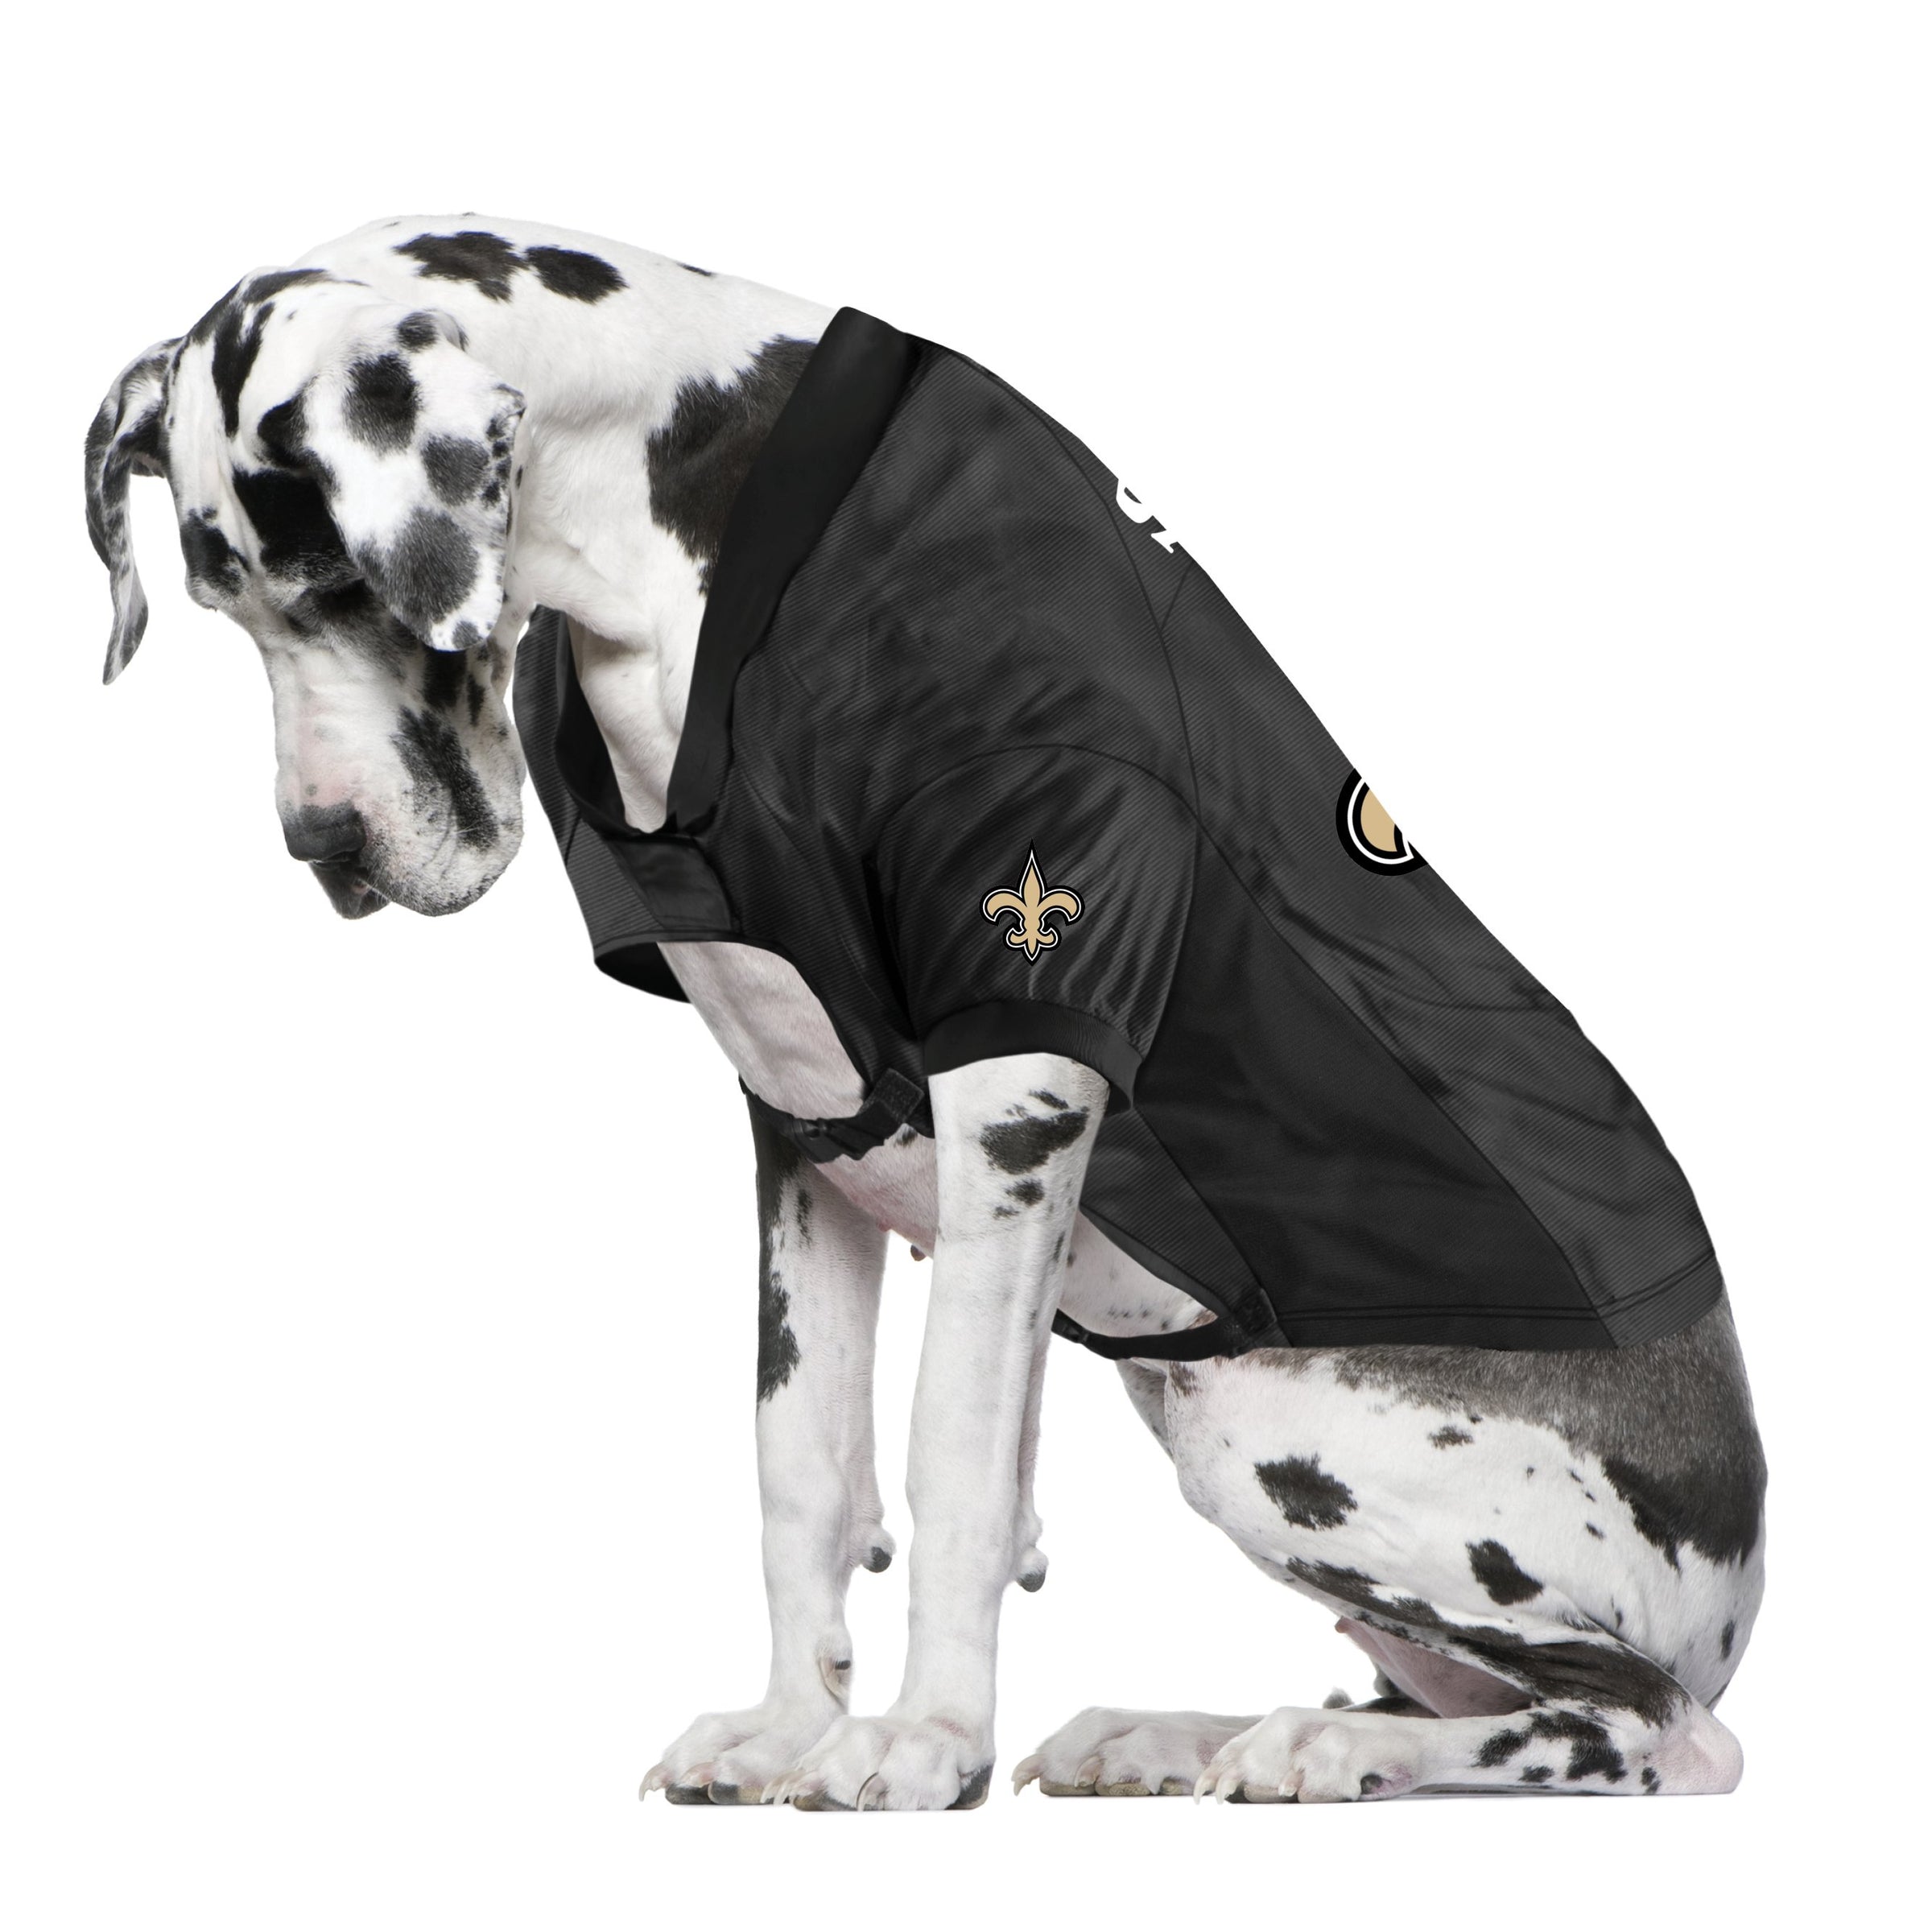 New NFL New Orleans Saints #00 Pet Dog Football Jersey for Sale in